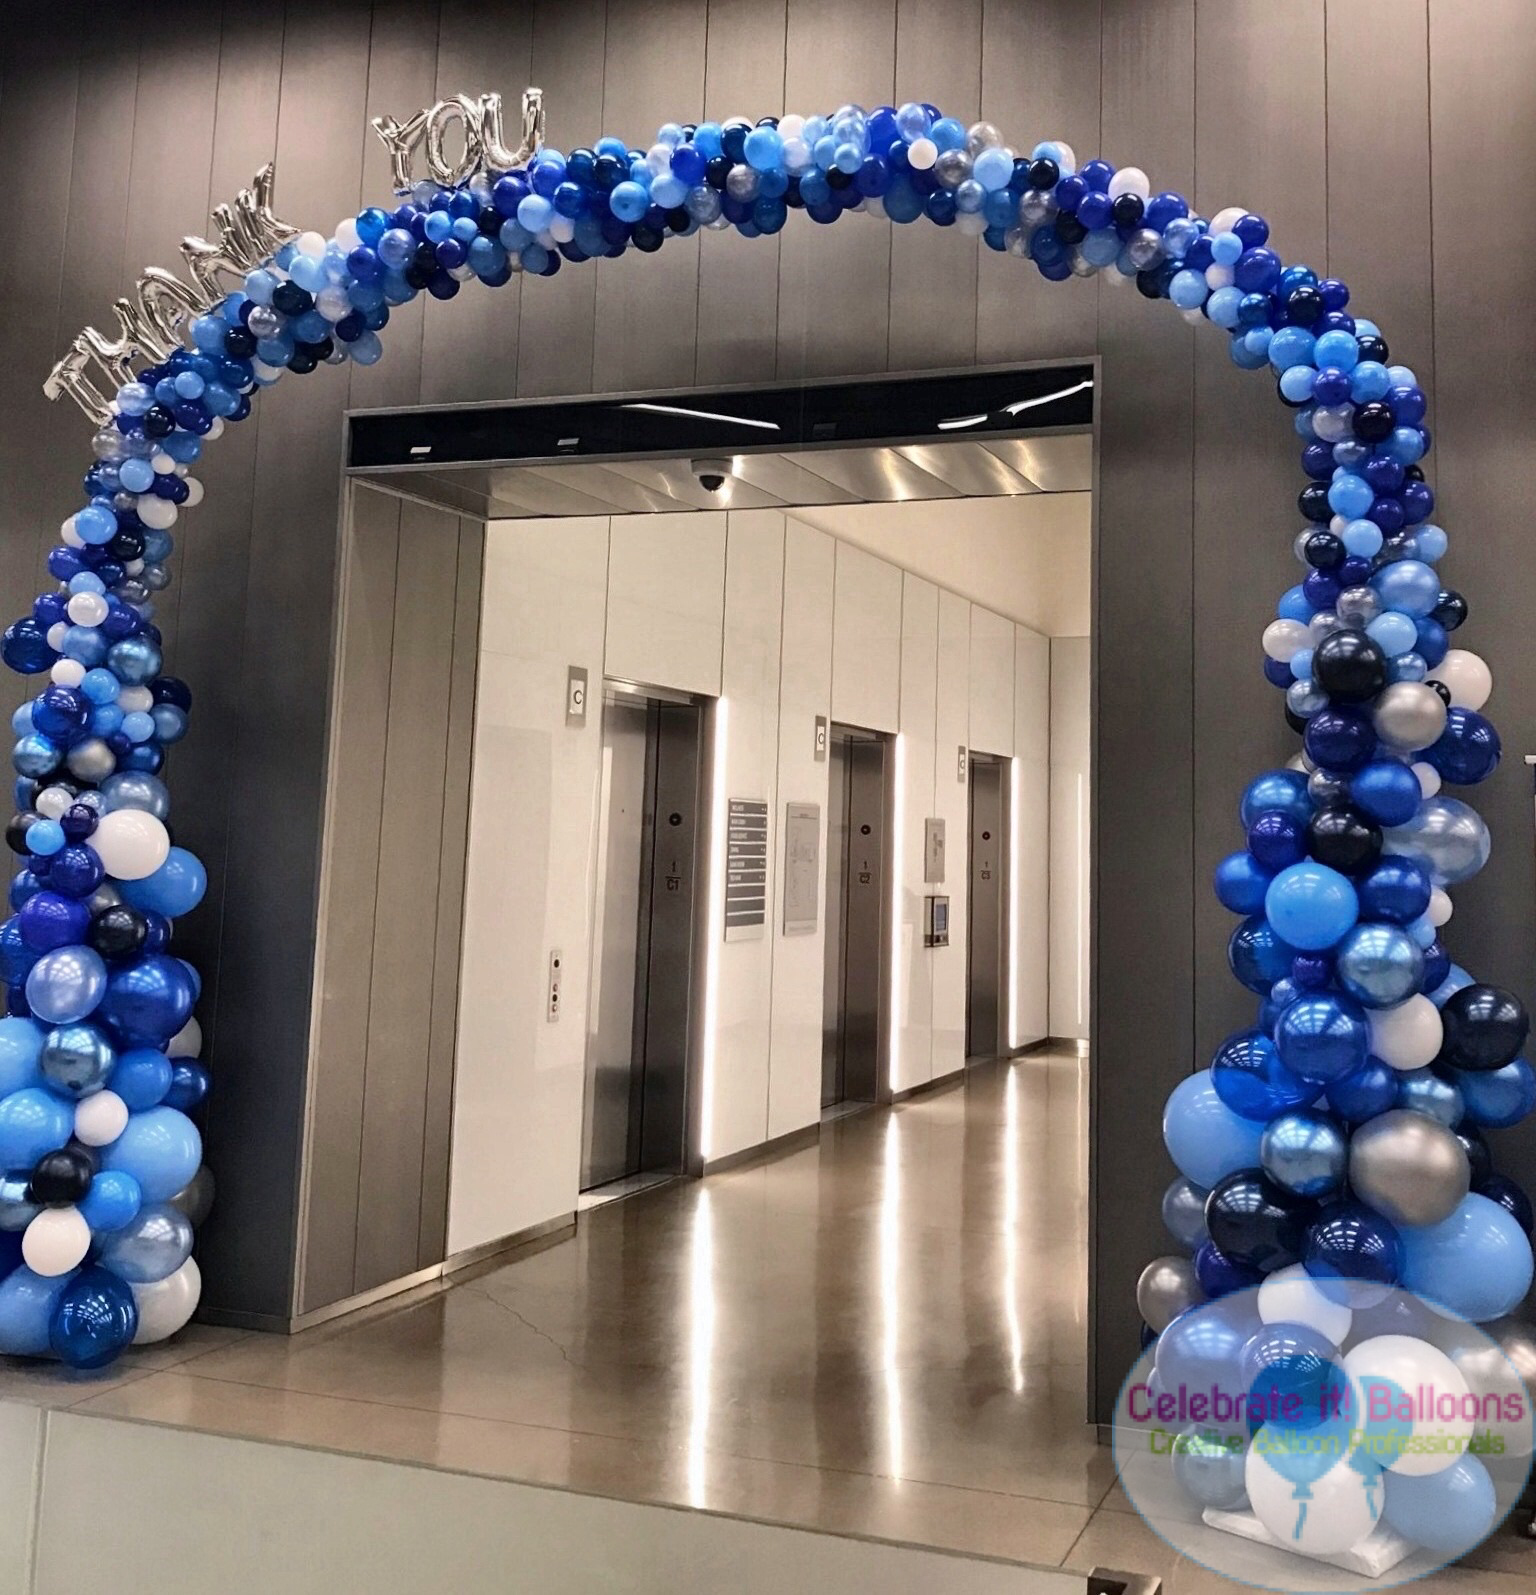 Organic balloon arch with letters